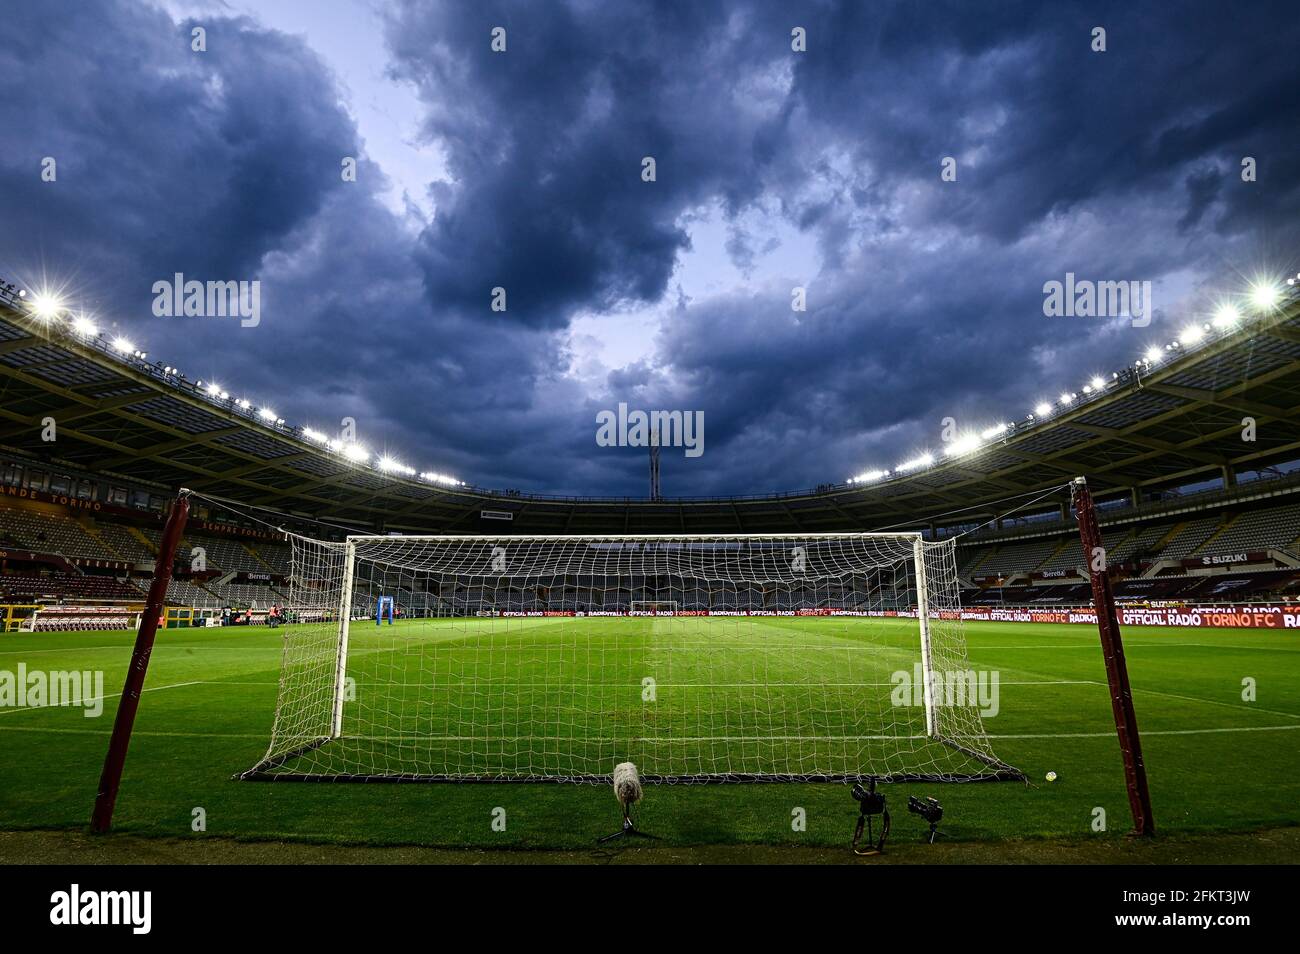 Turin, Italy. 03 May 2021. General view shows a goal and the pitch of  stadio Olimpico Grande Torino prior to the Serie A football match between Torino  FC and Parma Calcio. Torino